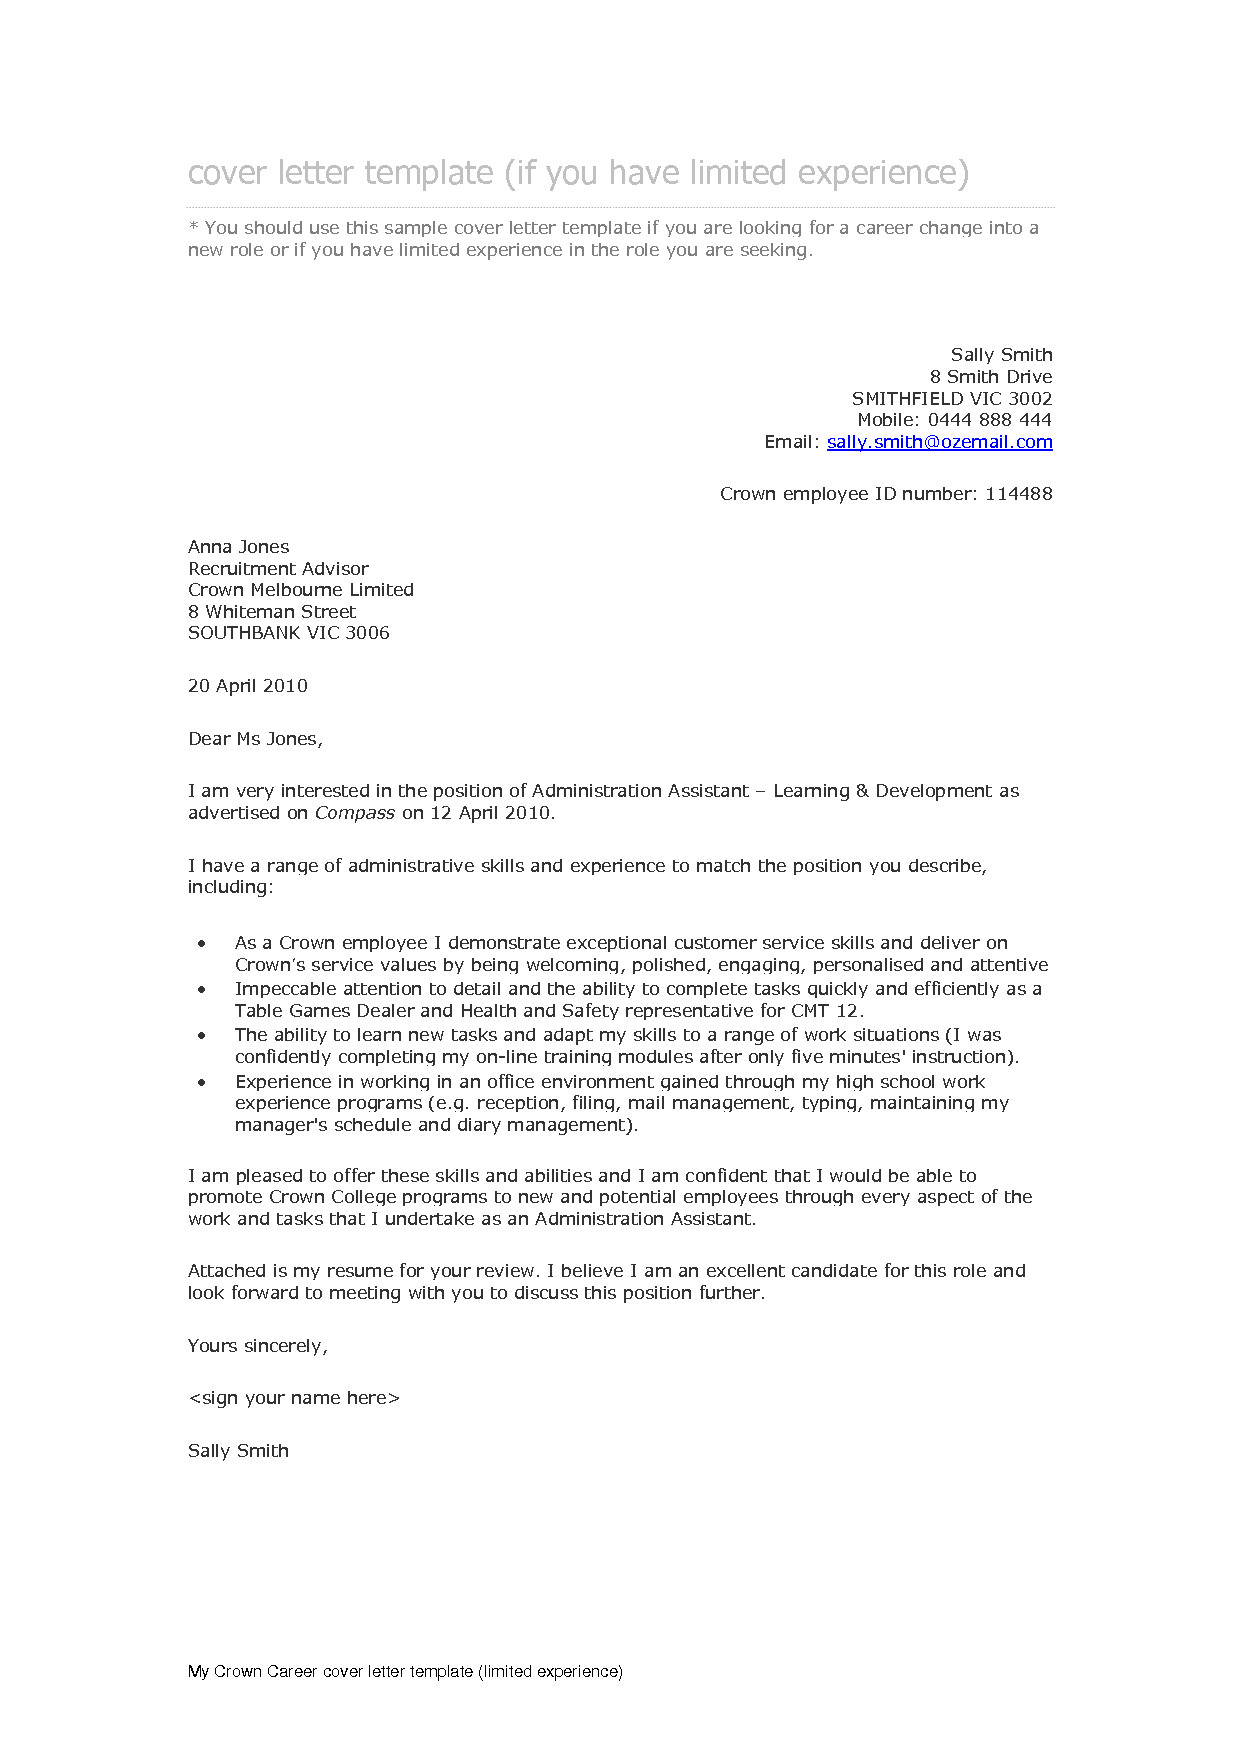 Cover Letter No Experience Cover Letter for Work Experience Placement